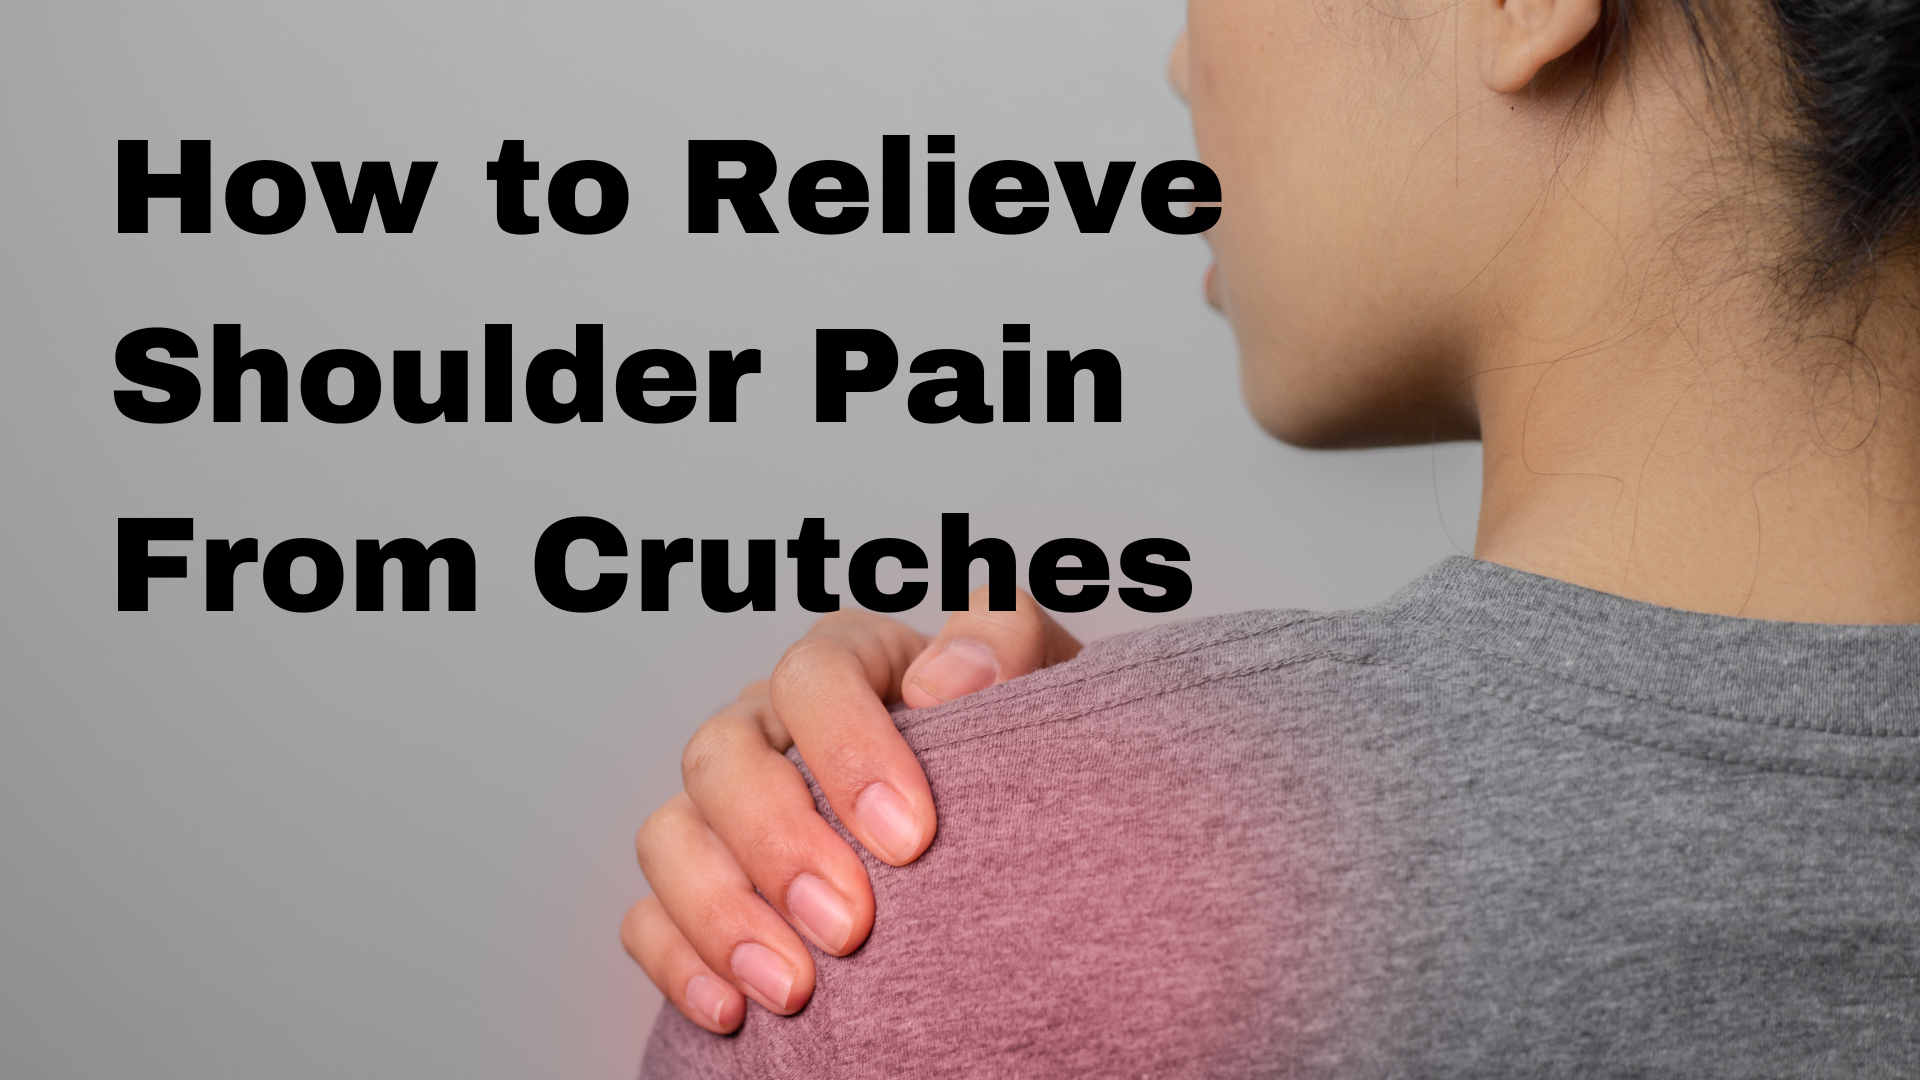 How to Relieve Shoulder Pain From Crutches